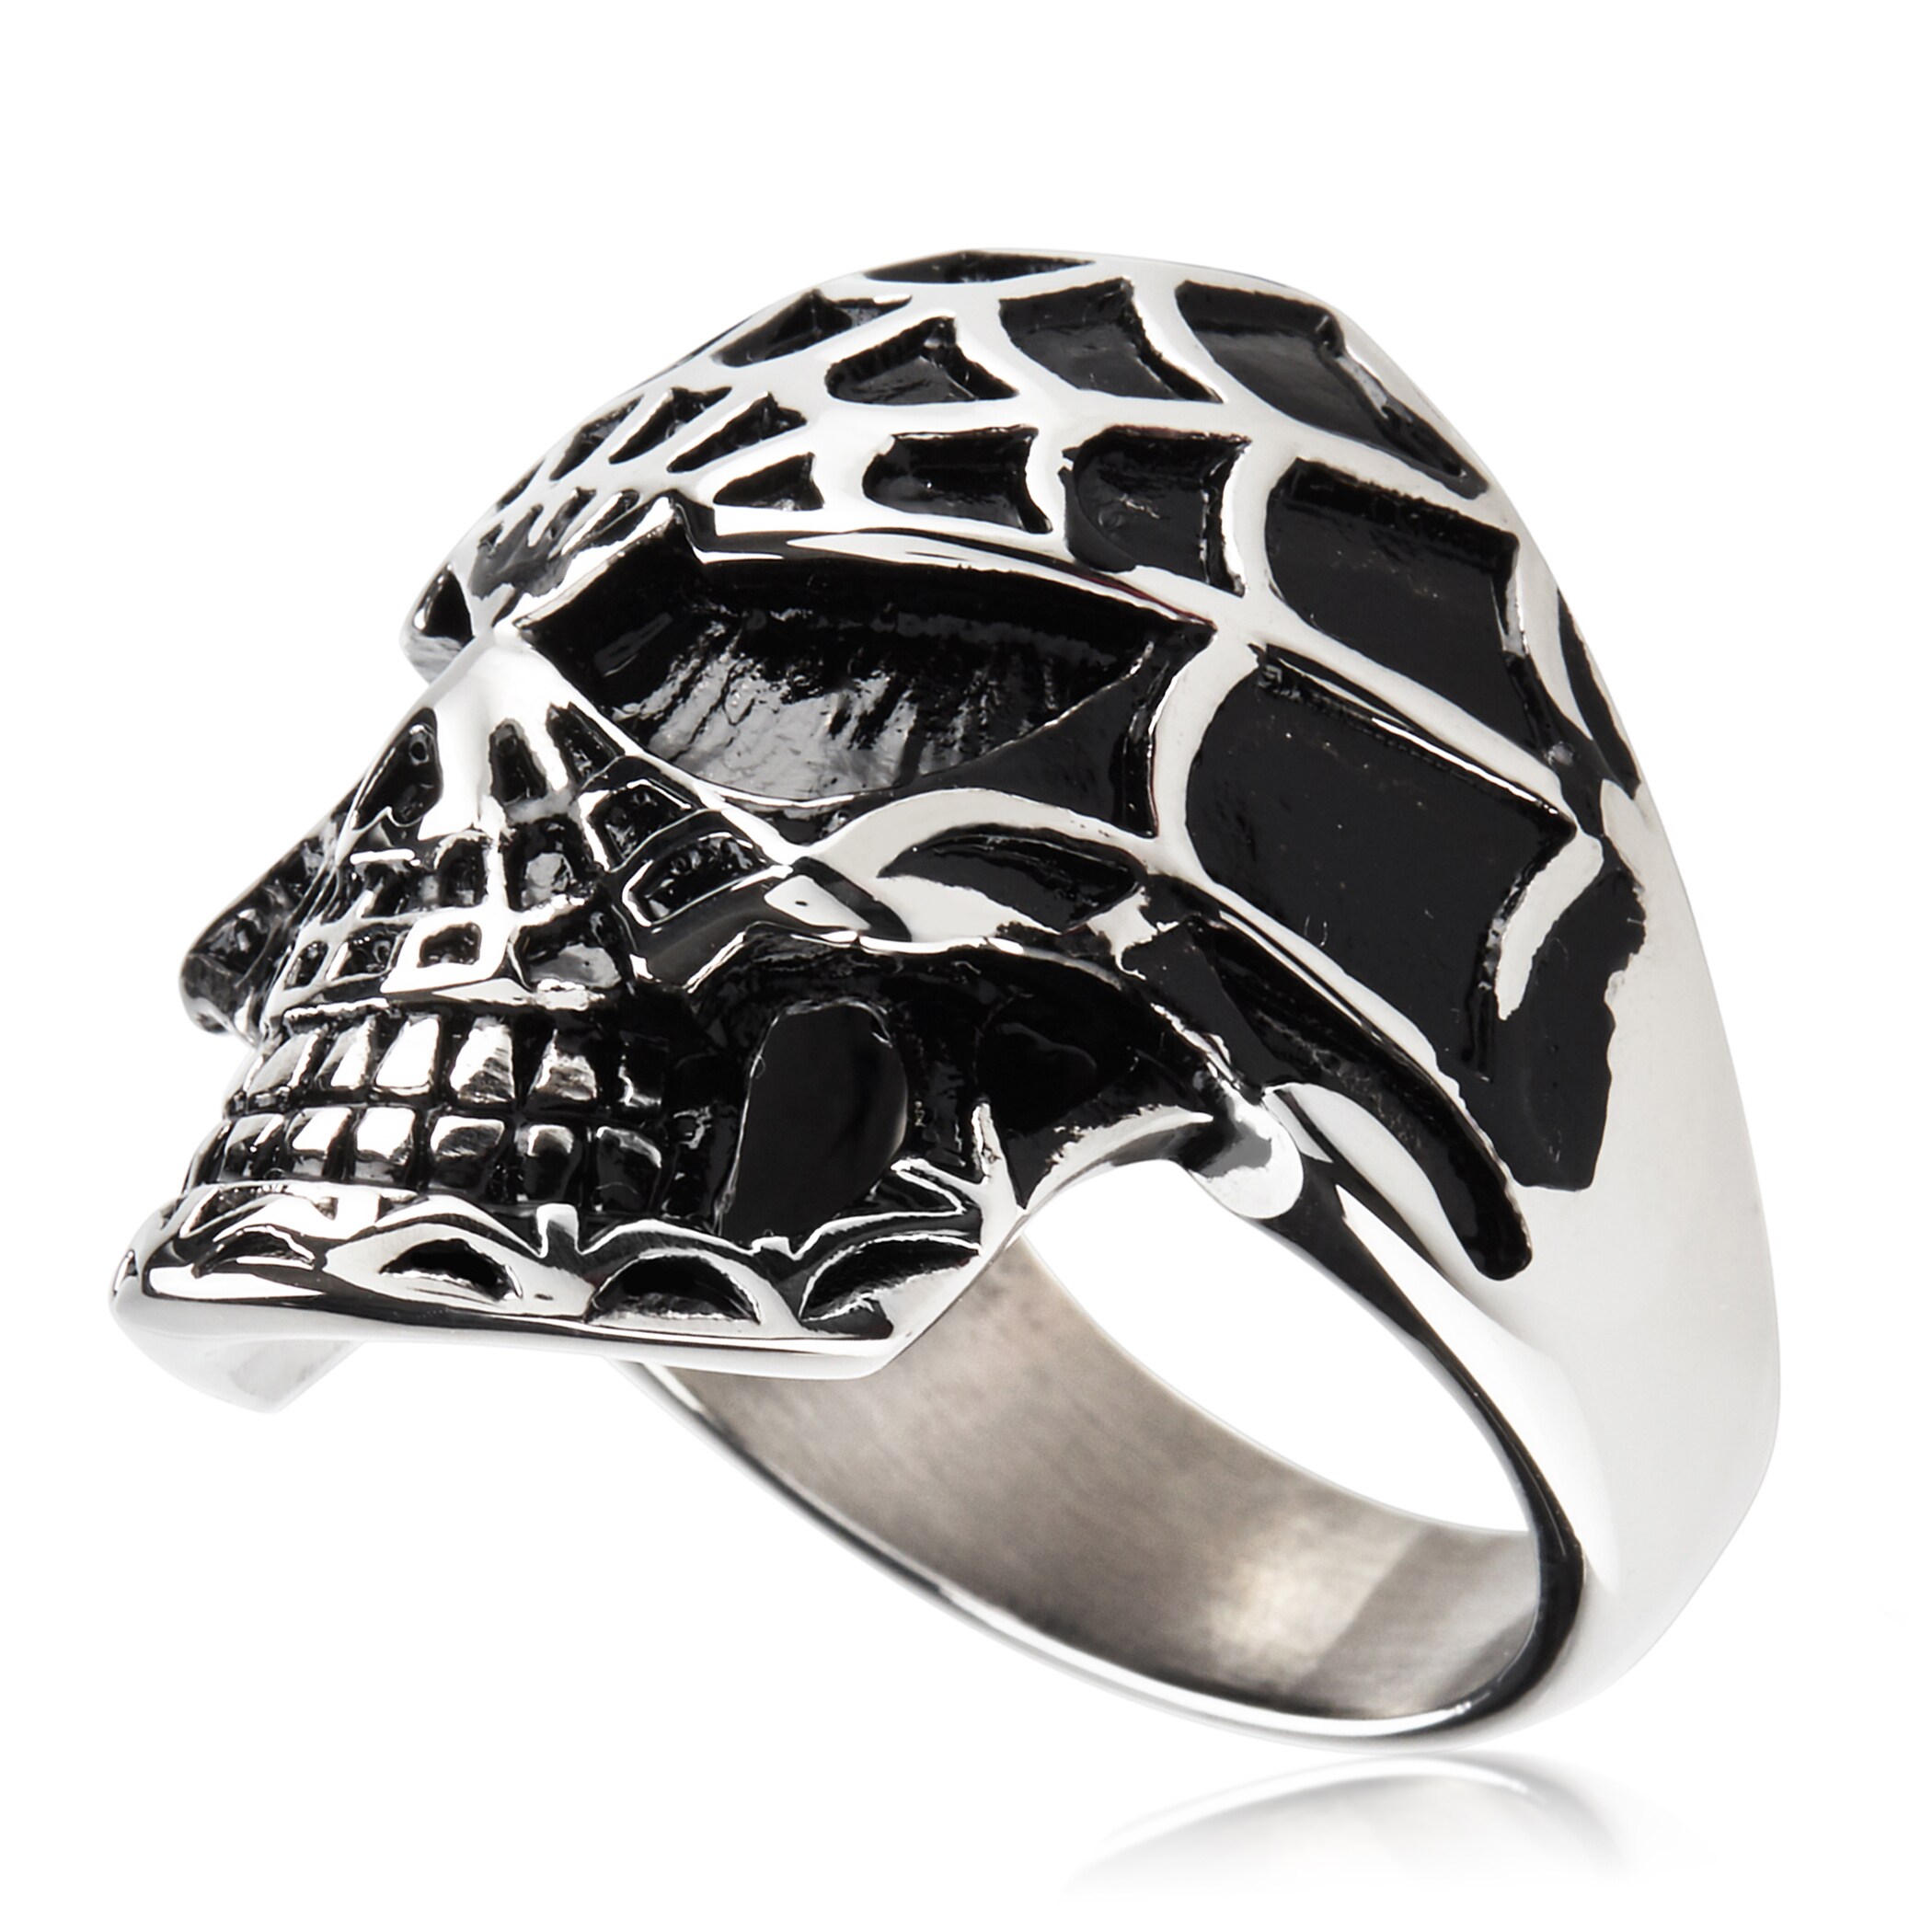 Goldia Mens Stainless Steel Polished and Antiqued Skull Ring 